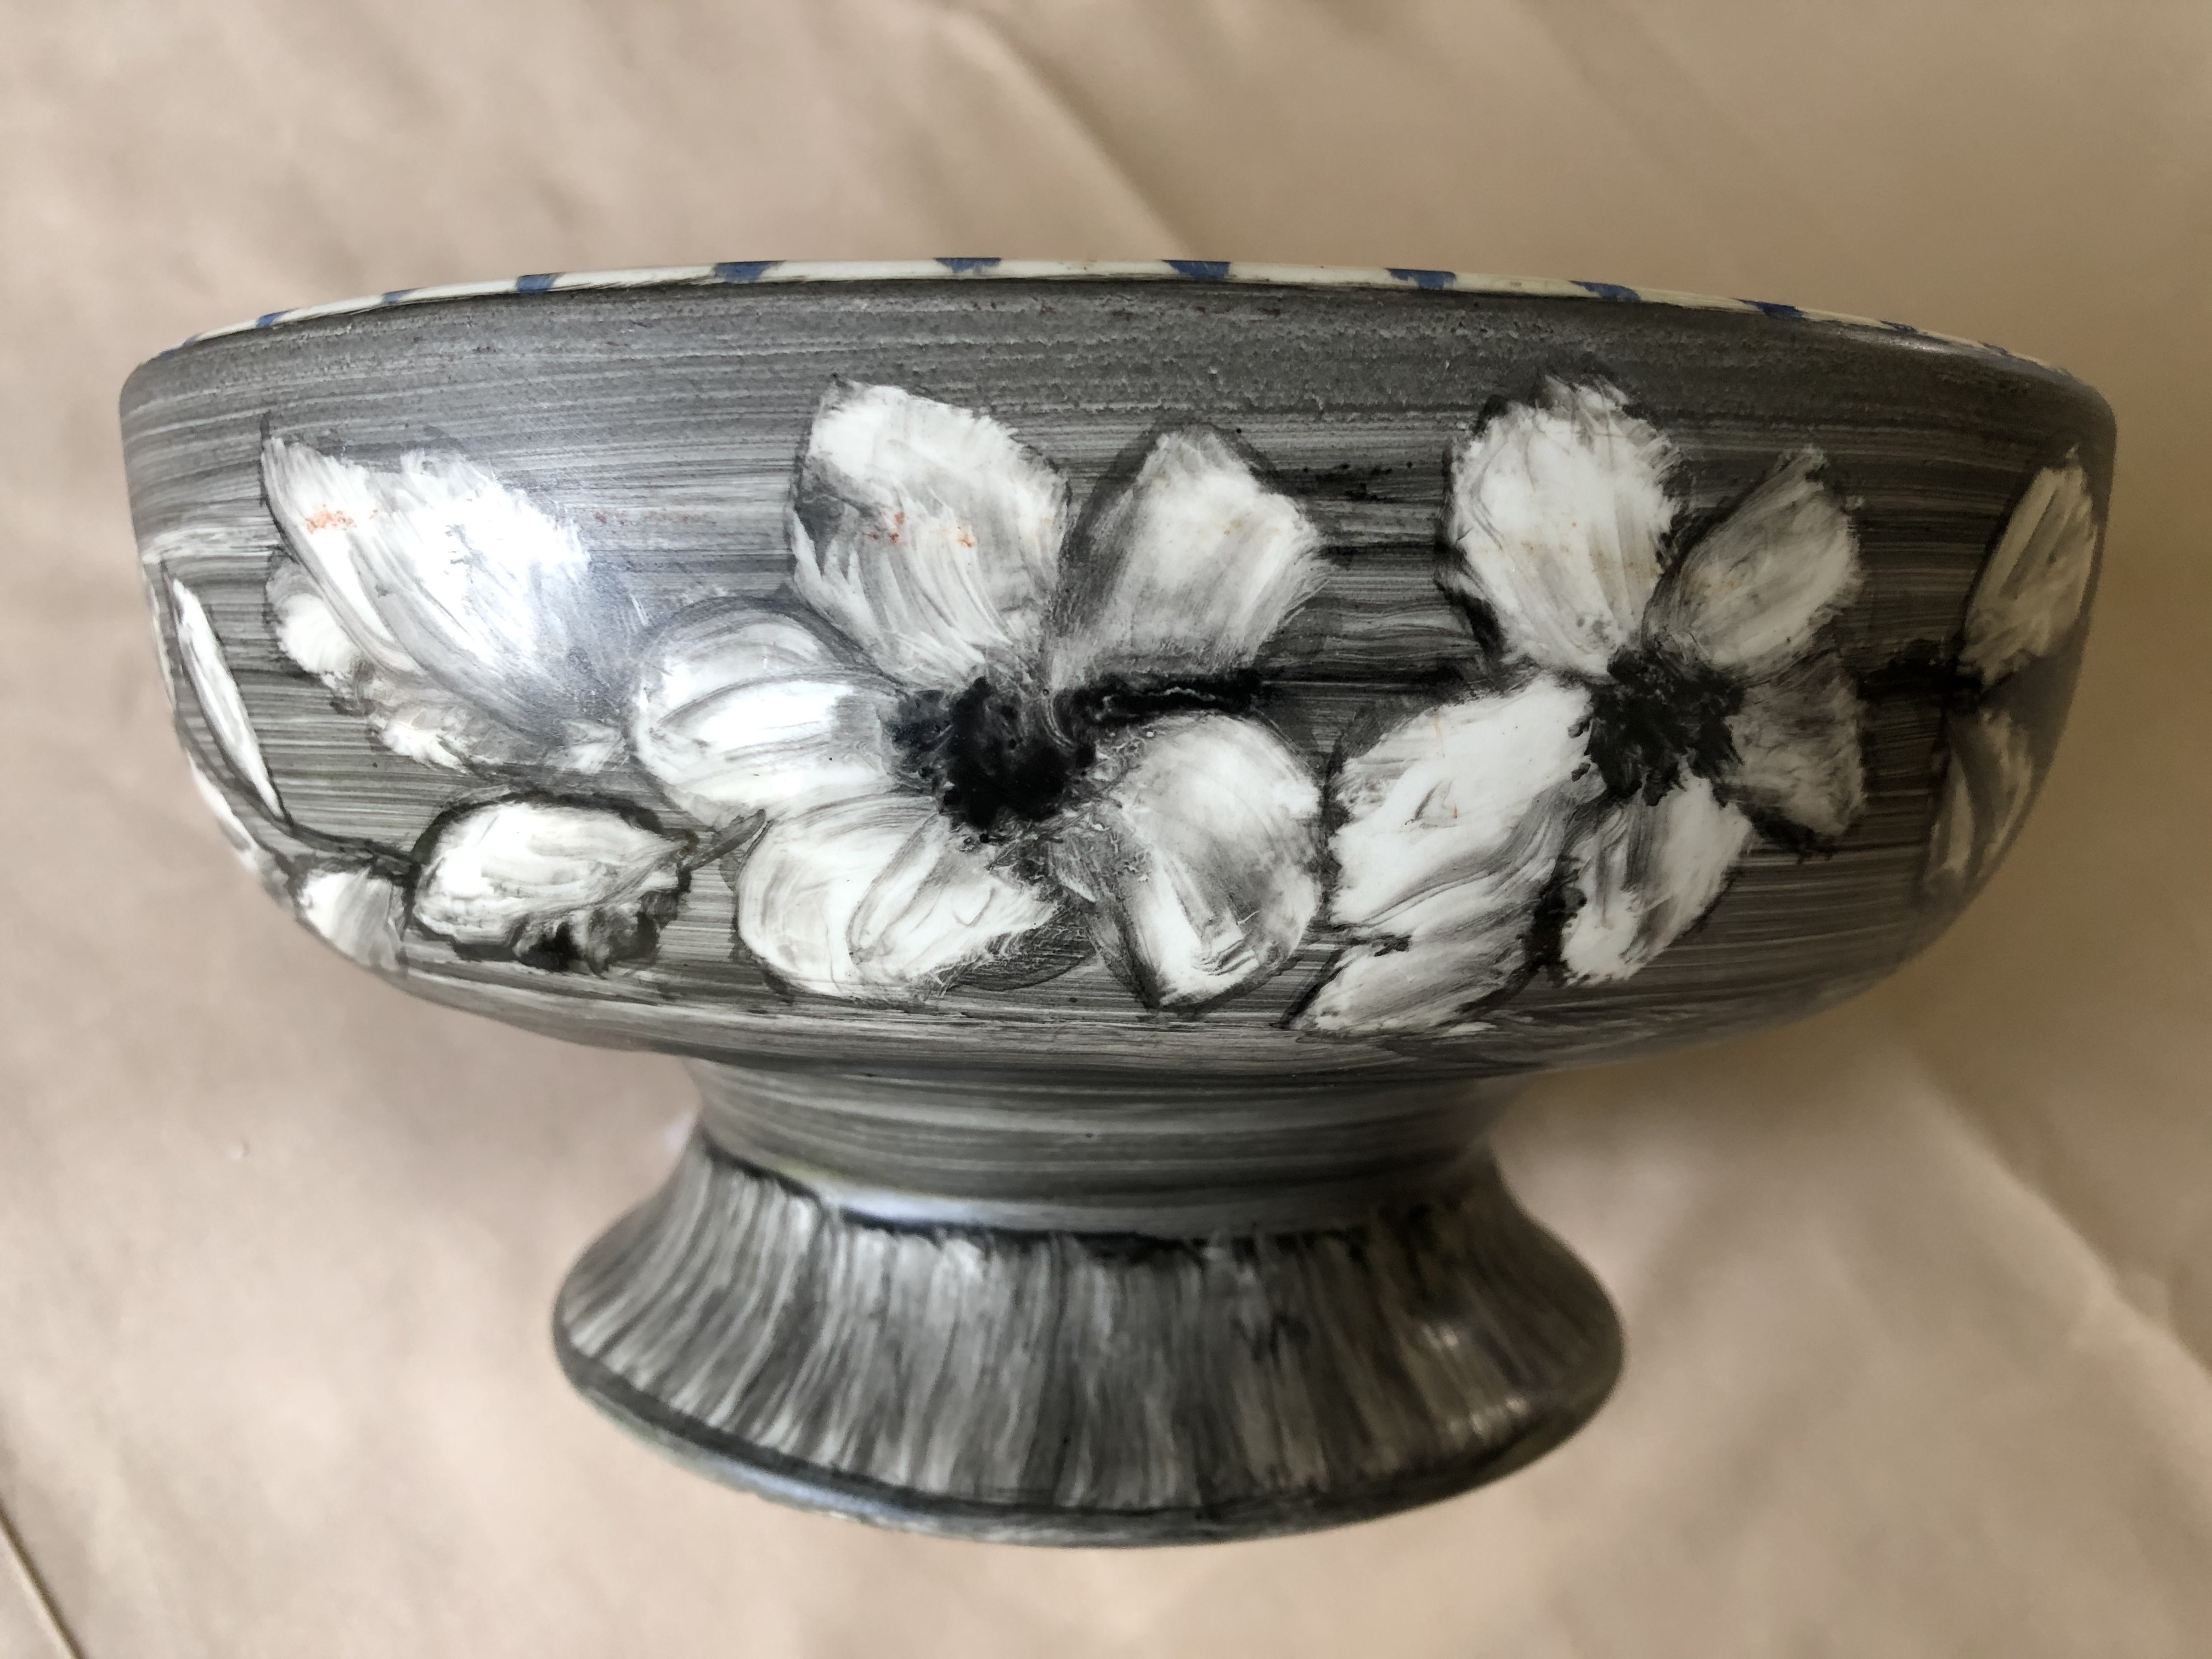 LARGE HAND PAINTED BOWL FROM THE UNION CASTLE LINE SHIPPING COMPANY